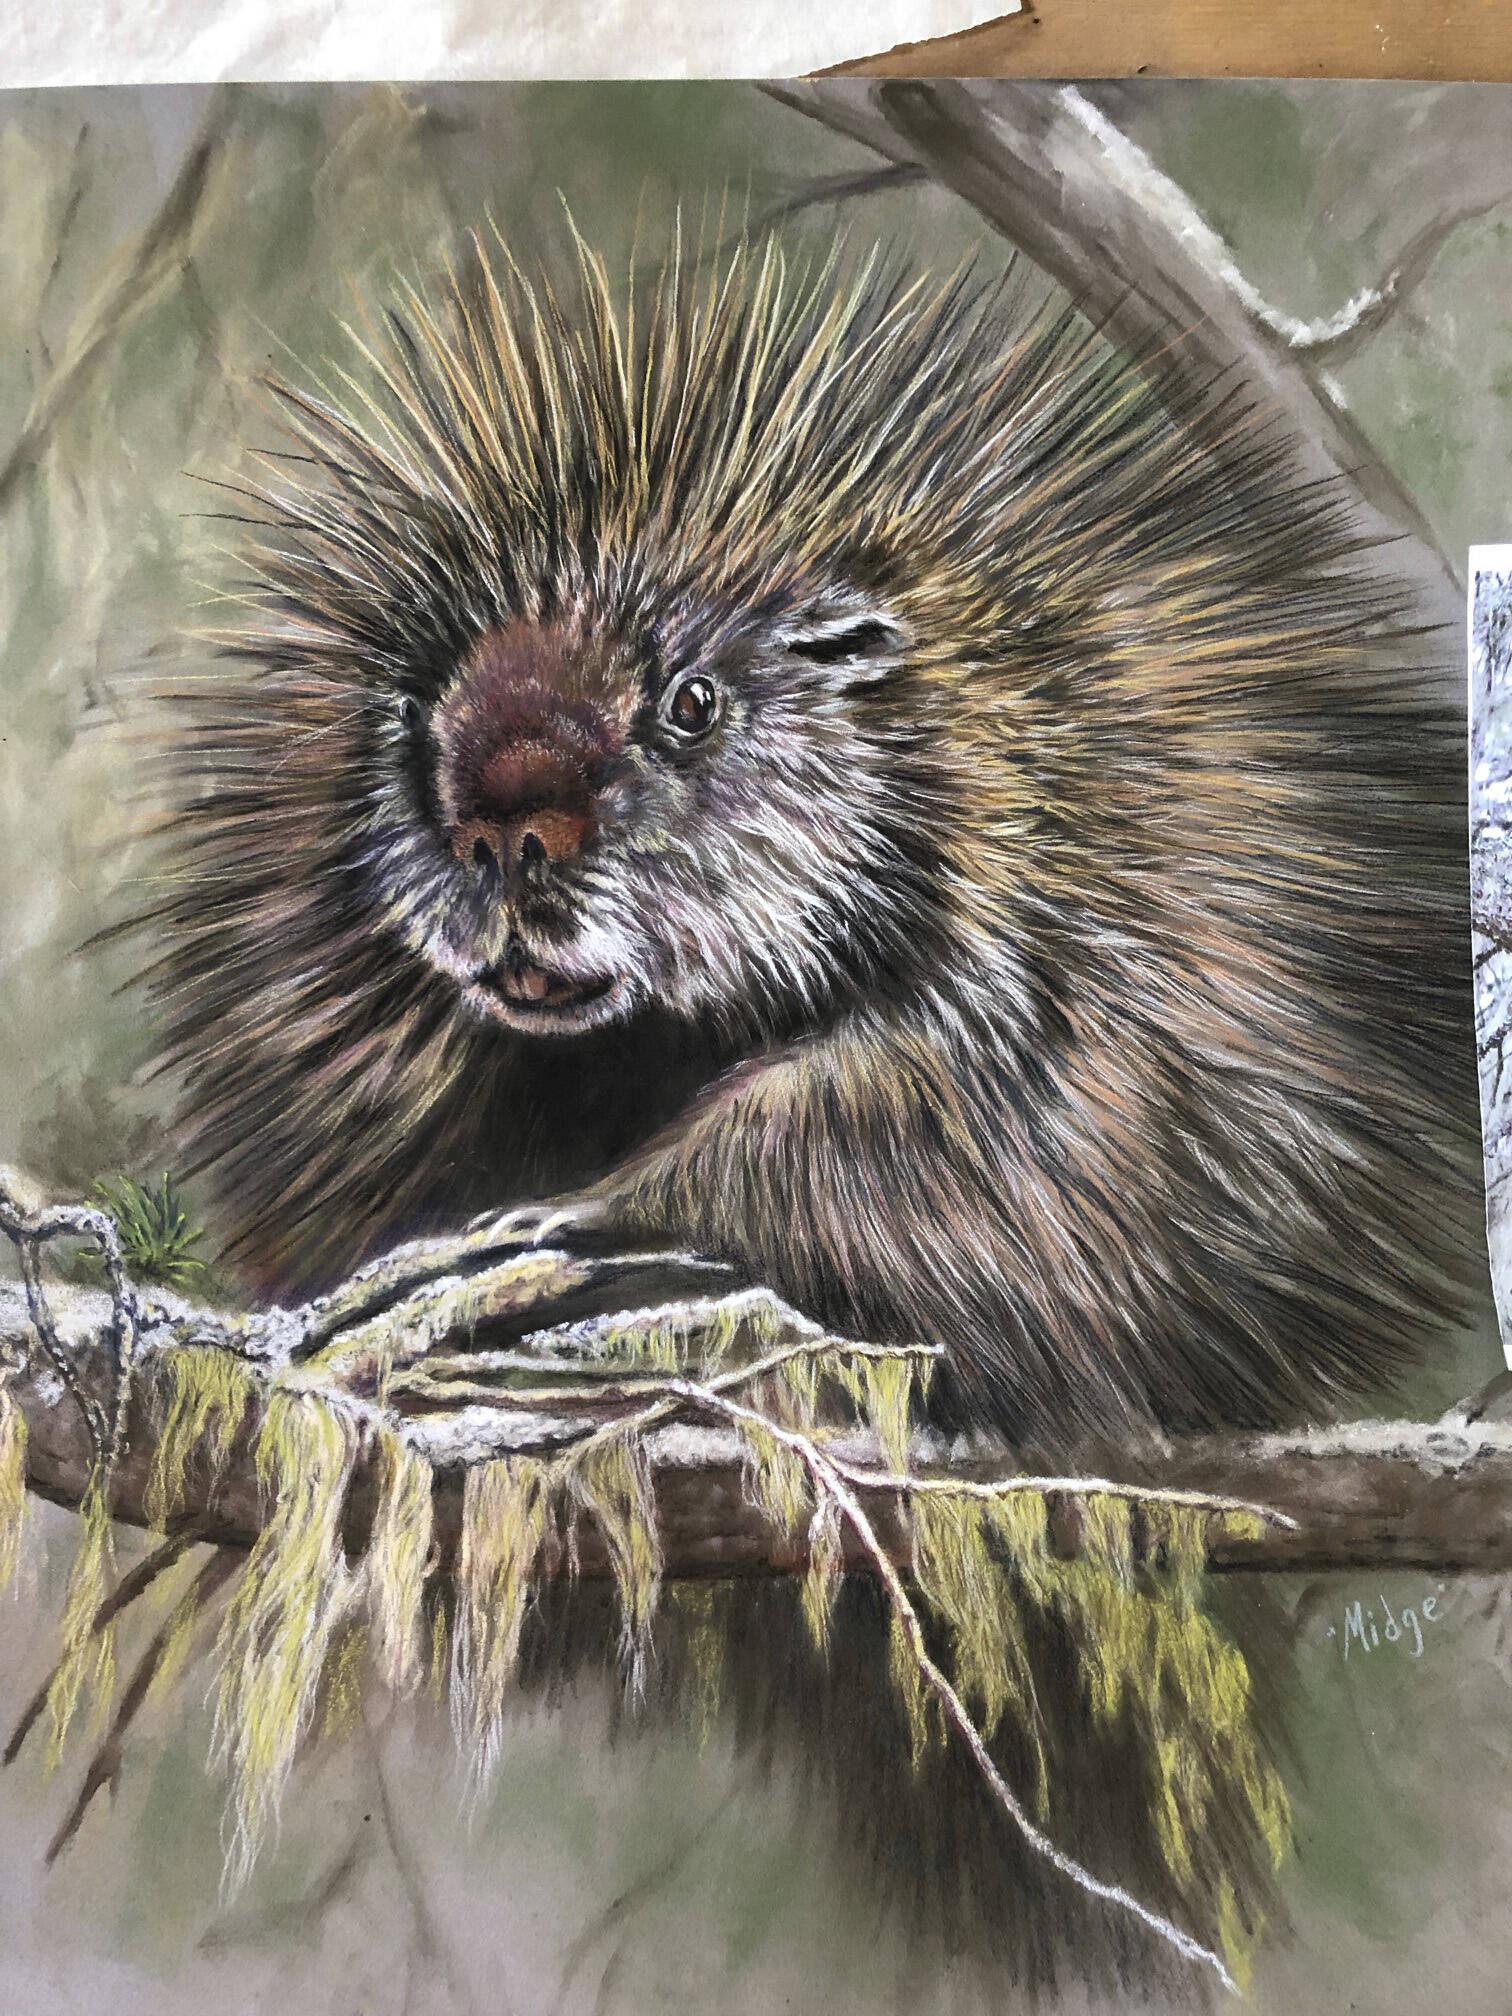 Photo provided
A pastel drawing from Turea M. “Midge” Grice’s show opening Friday, Aug. 5, at Fireweed Gallery in Homer.